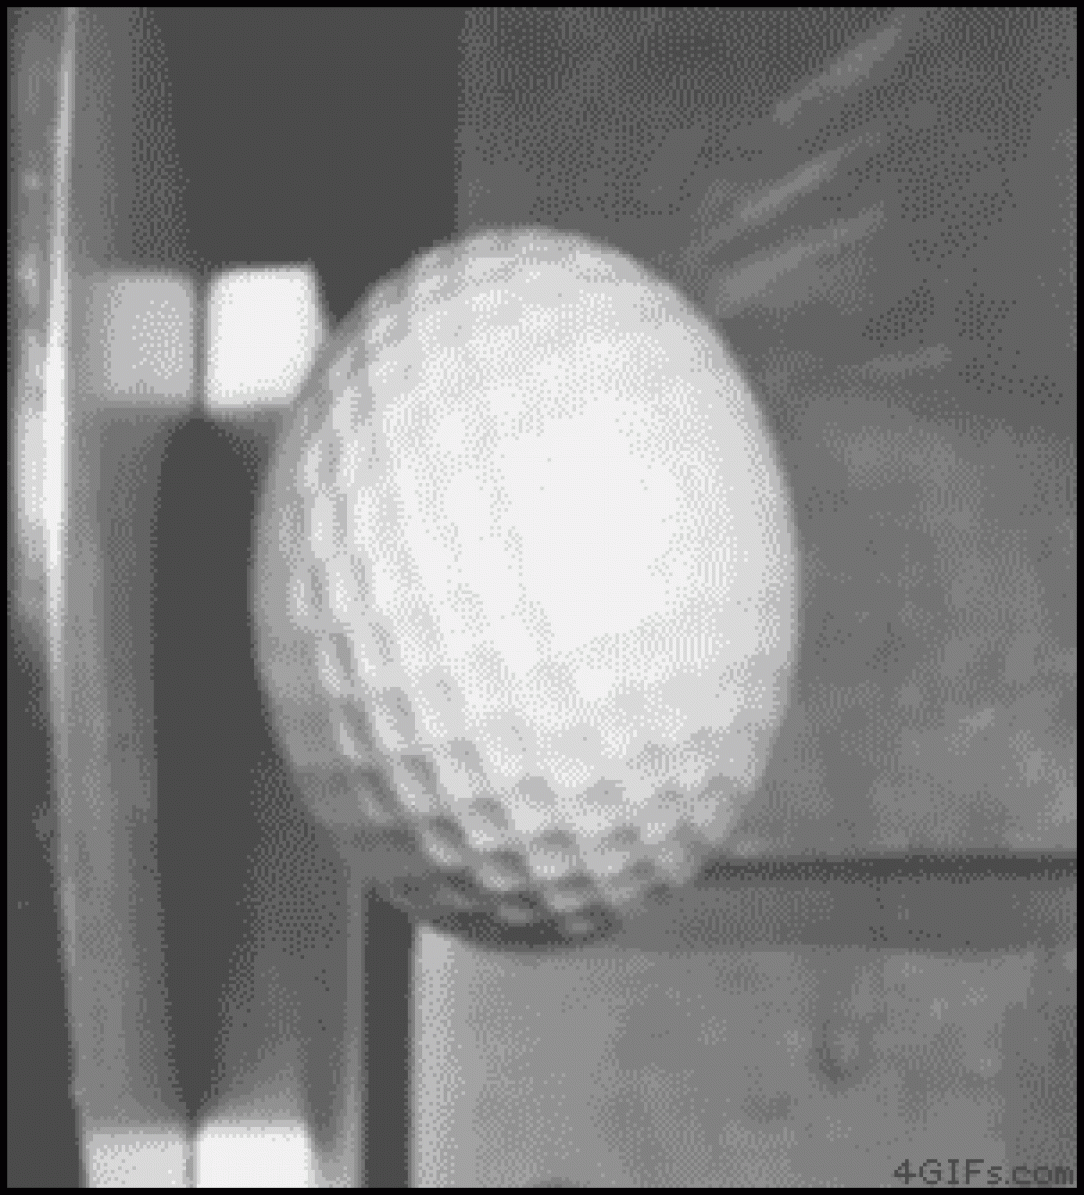 Golf ball bounce in slow-mo